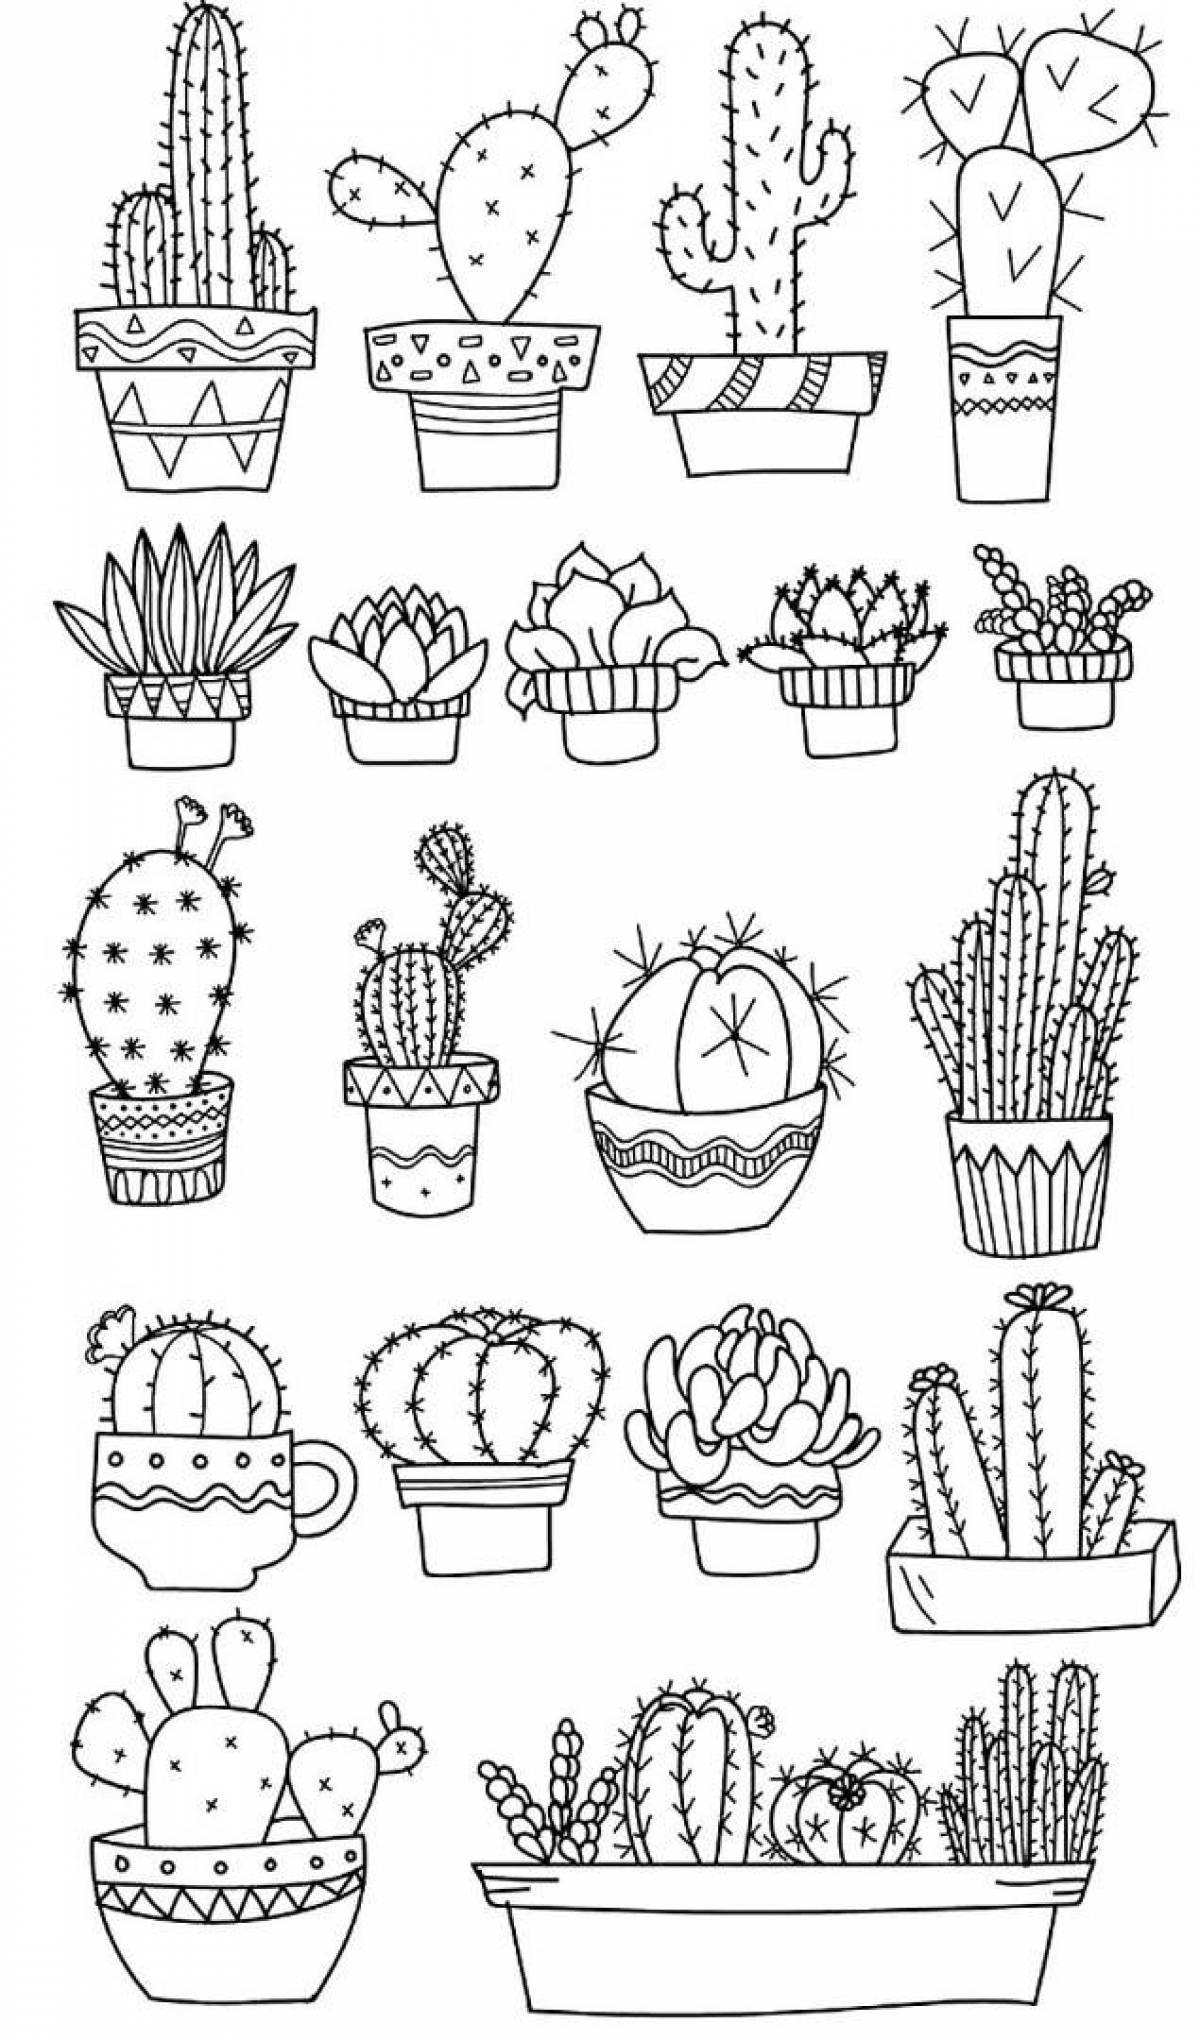 Color-frenzy coloring page from pinterest